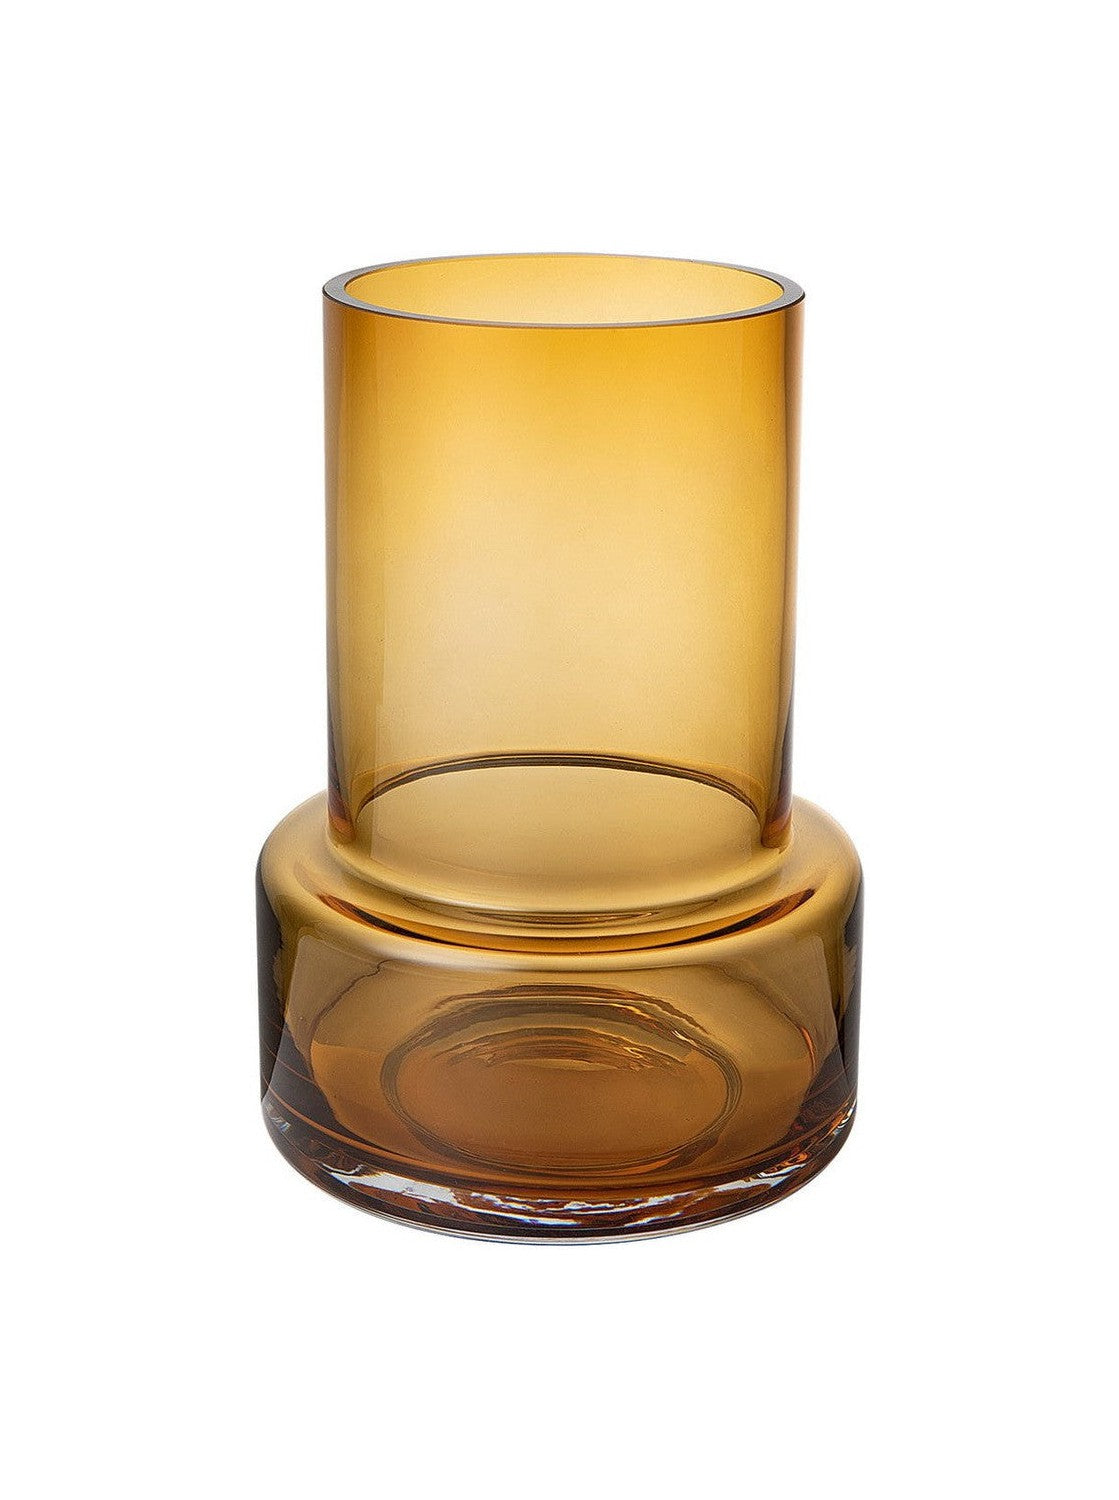 retro style thick glass vase, amber color: TYLER